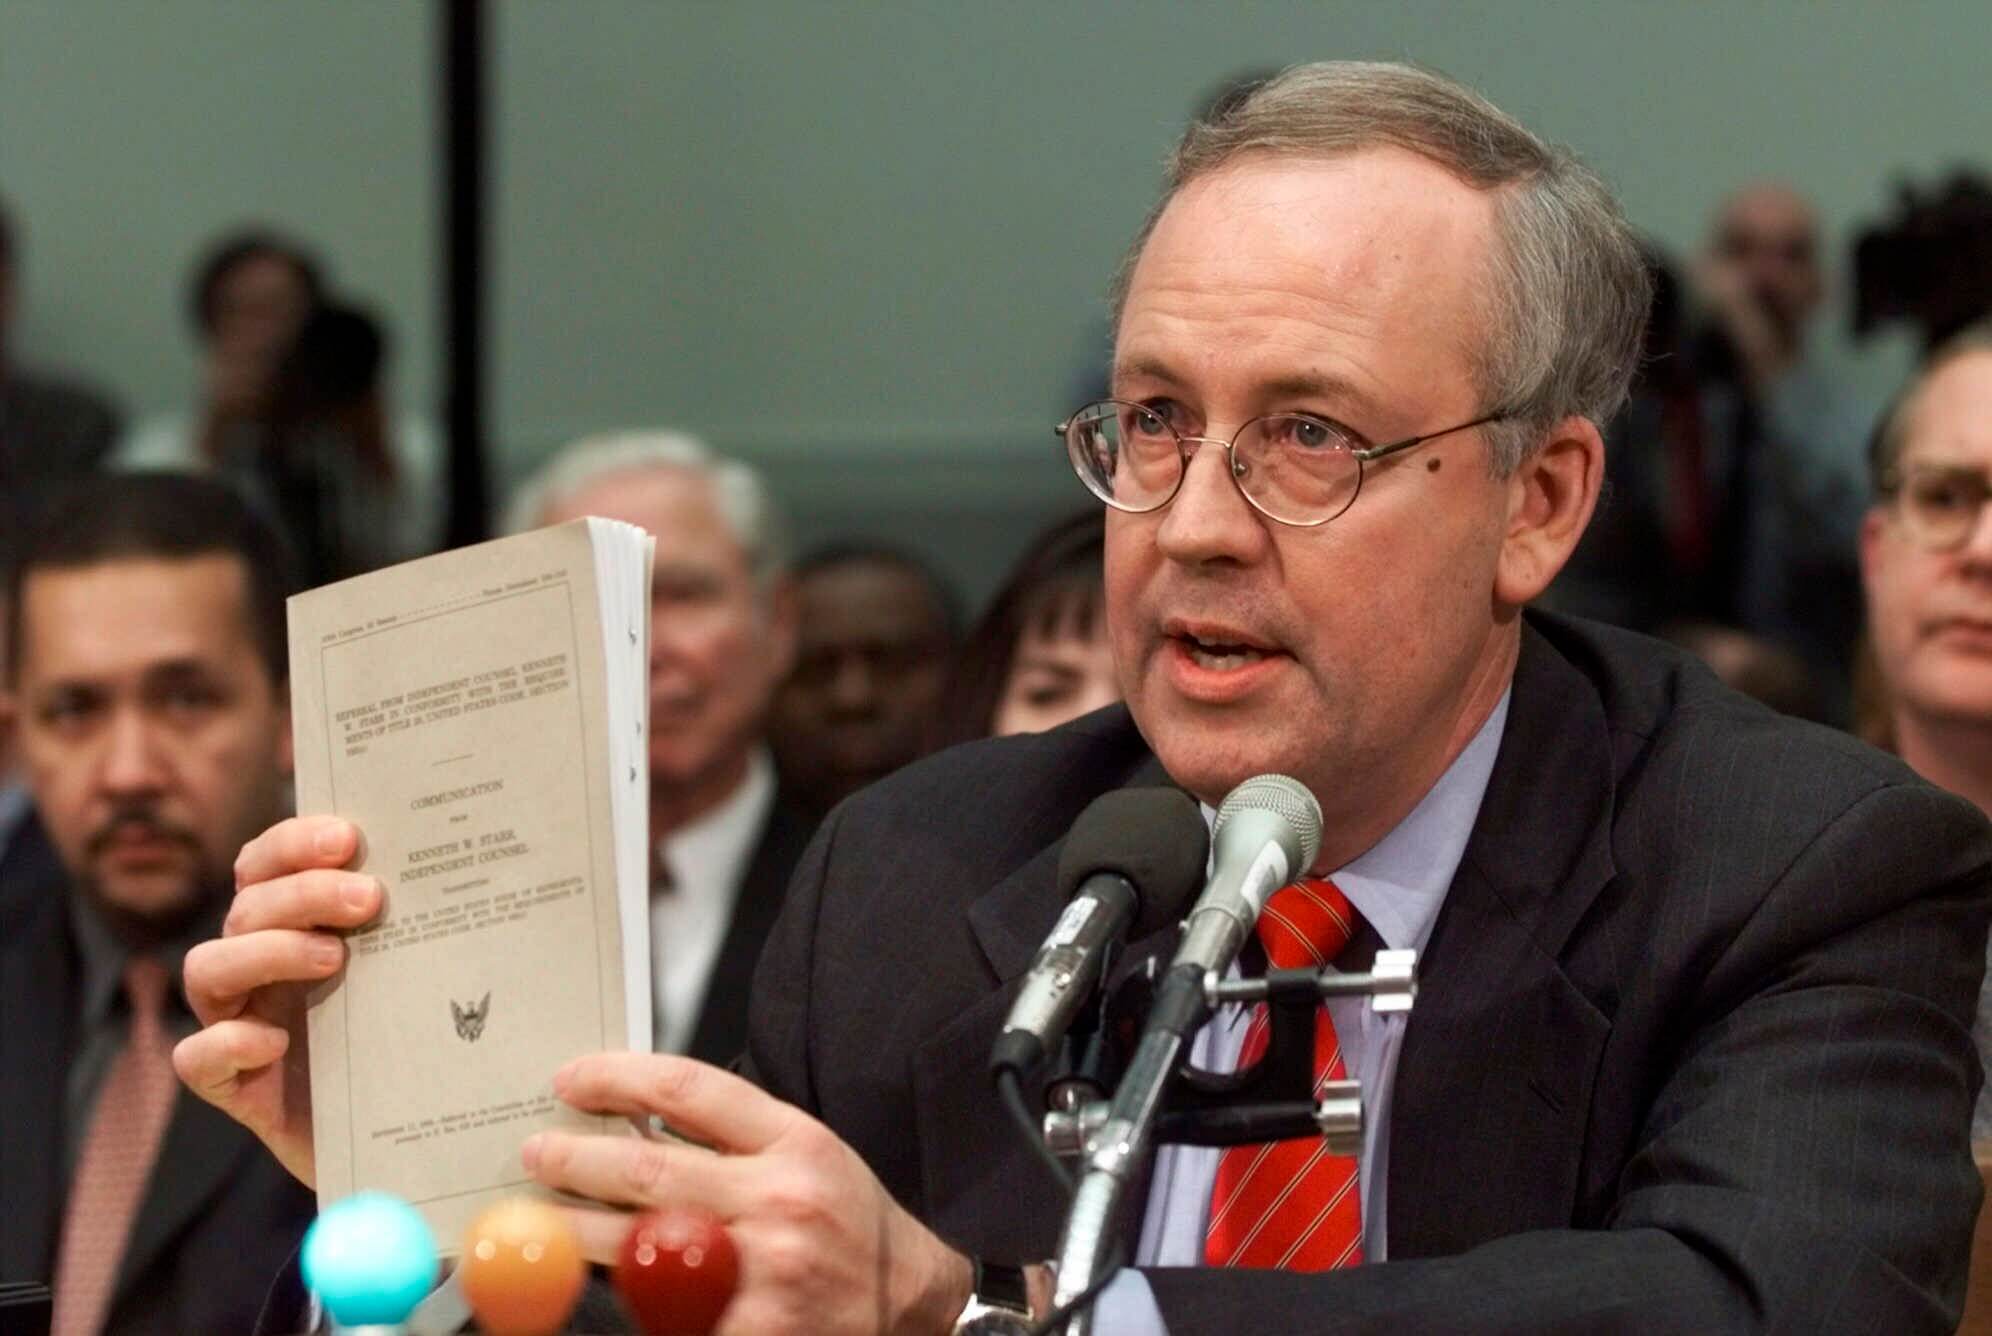 The death of Judge Ken Starr and traits that “were once considered normal”